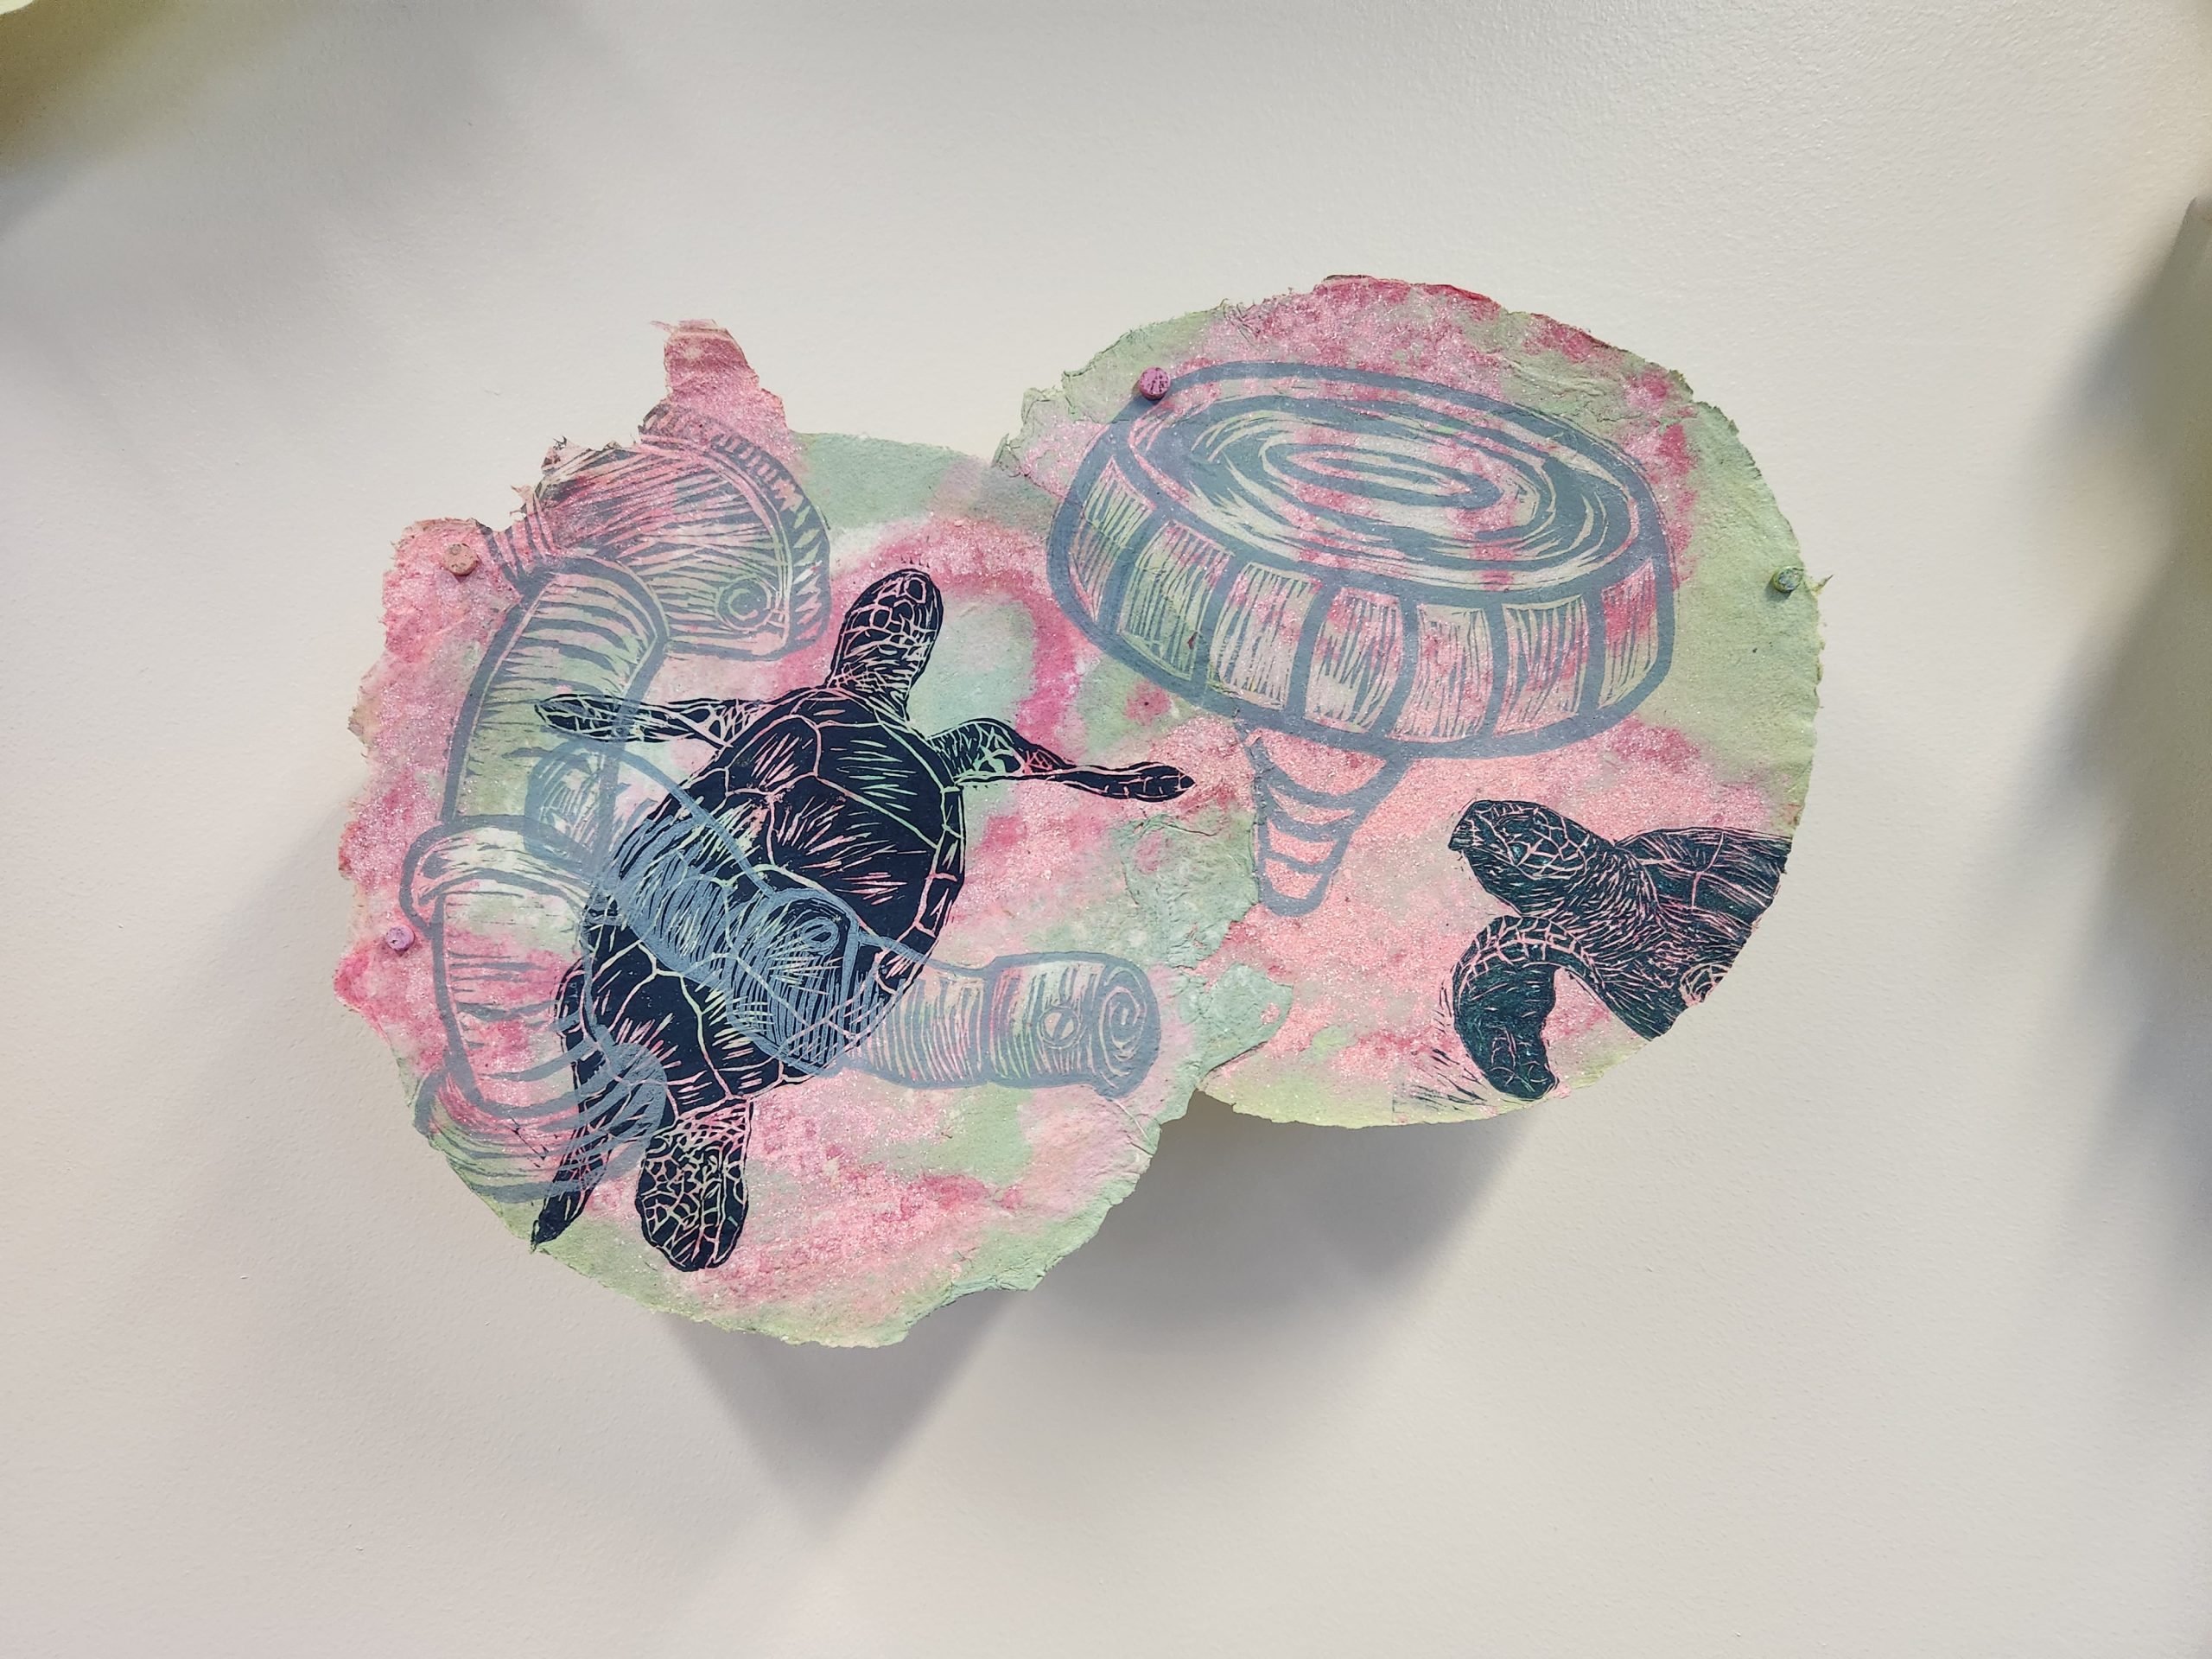 Marilyn Propp, "Small Divers XIV," 2014. Relief print on handmade cotton paper with pulp painting, 10 ¾ x 15 ½ in. Part of "Pulped Under Pressure," 2022. Installation view, Glickman Family Library.